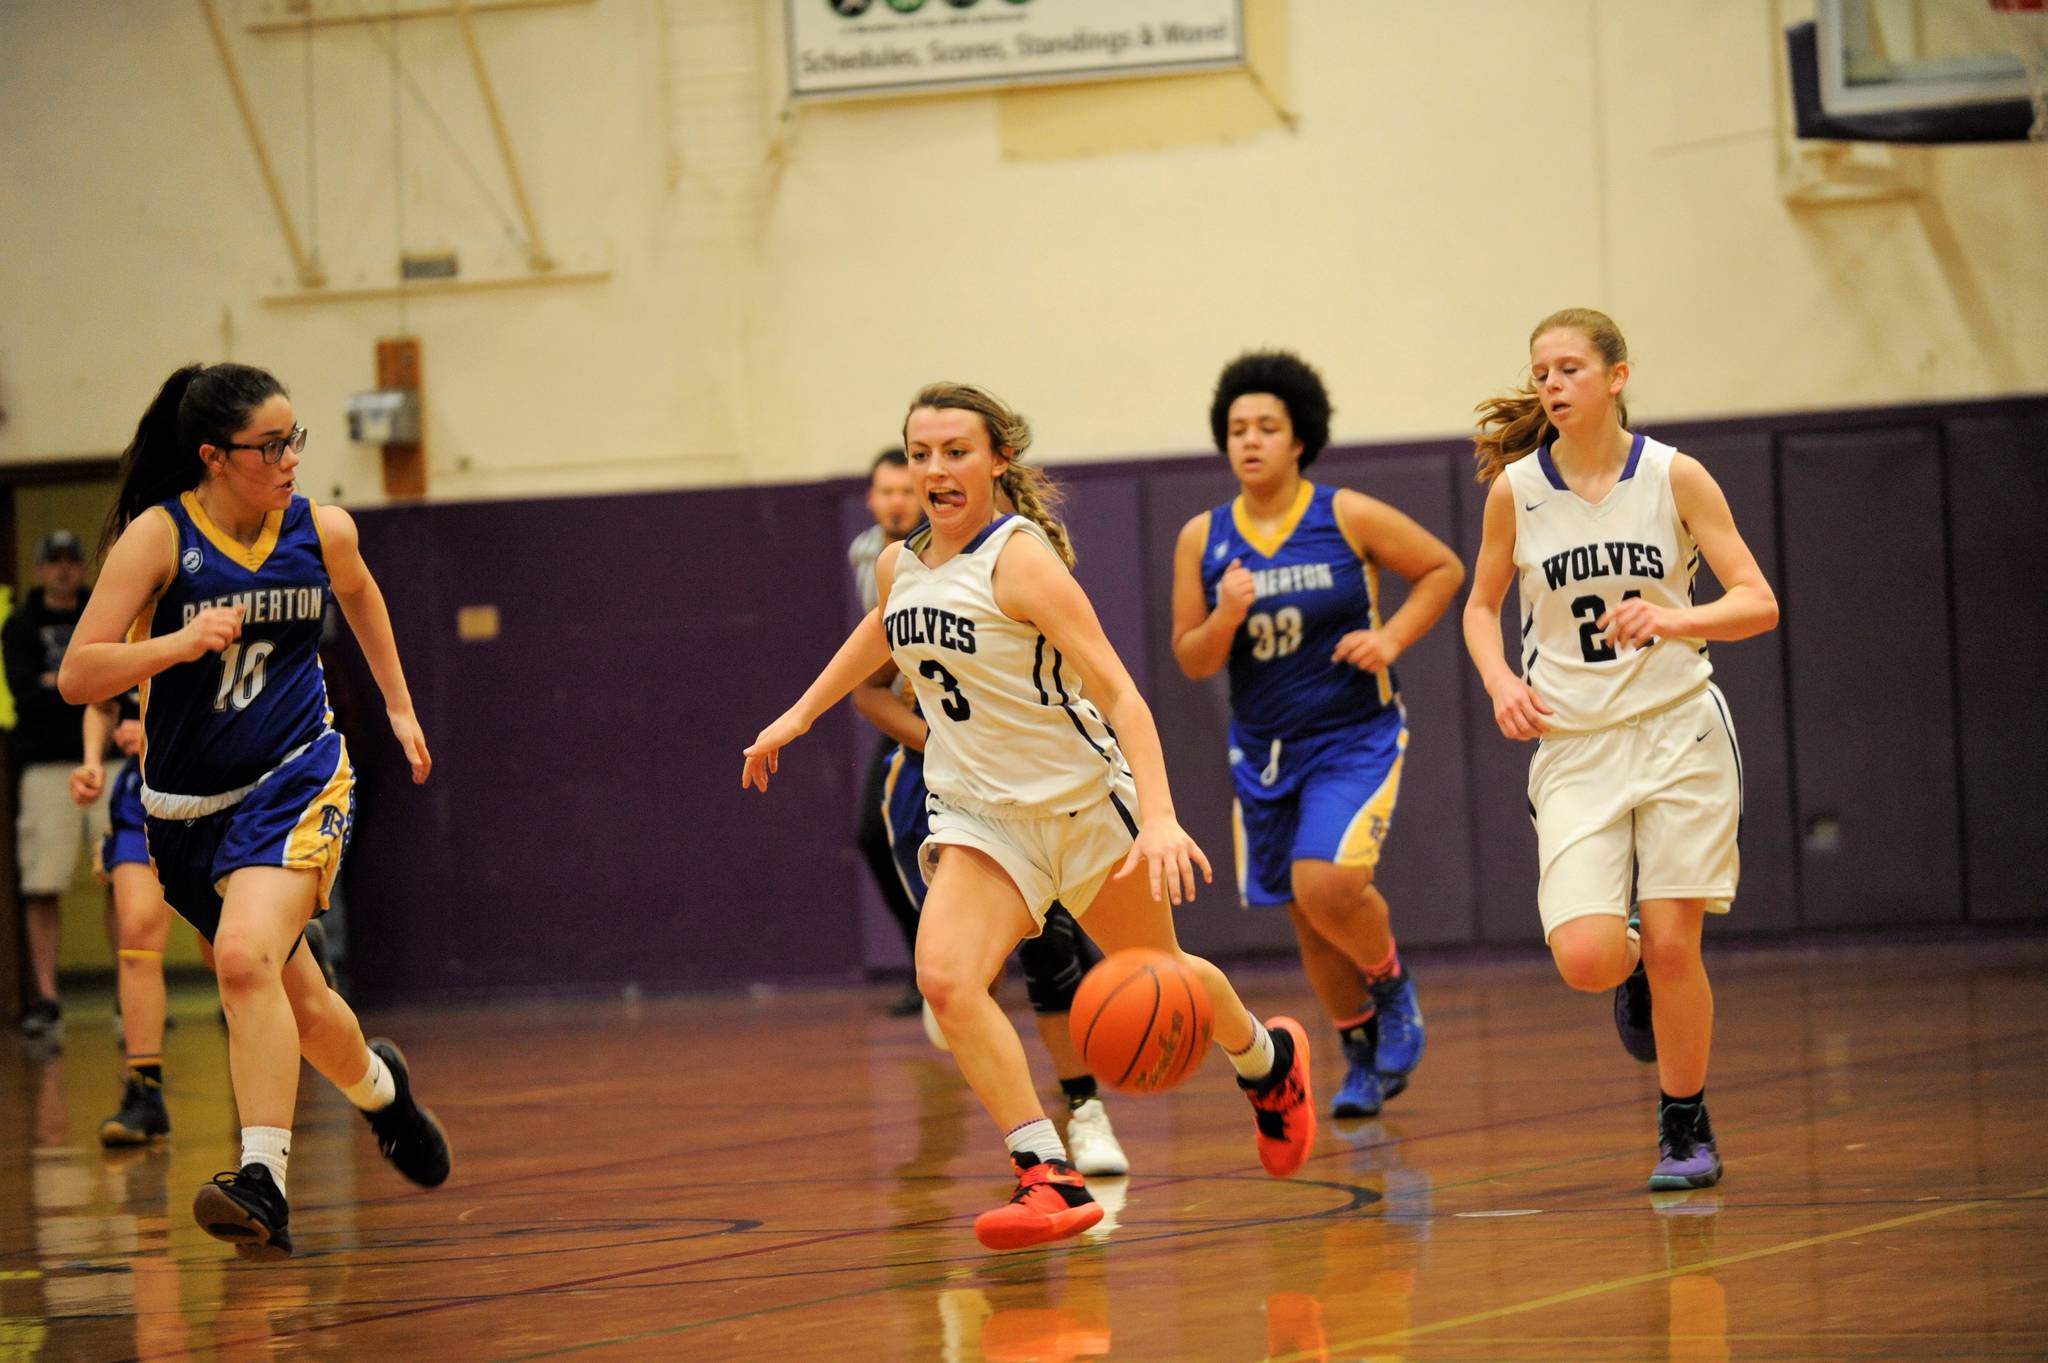 Sequim point guard Bobbi Sparks runs on a fast break past Bremerton defenders on Jan. 19. Sparks finished with nine points and had two steals in the 54-26 win. Sequim Gazette photo by Matthew Nash